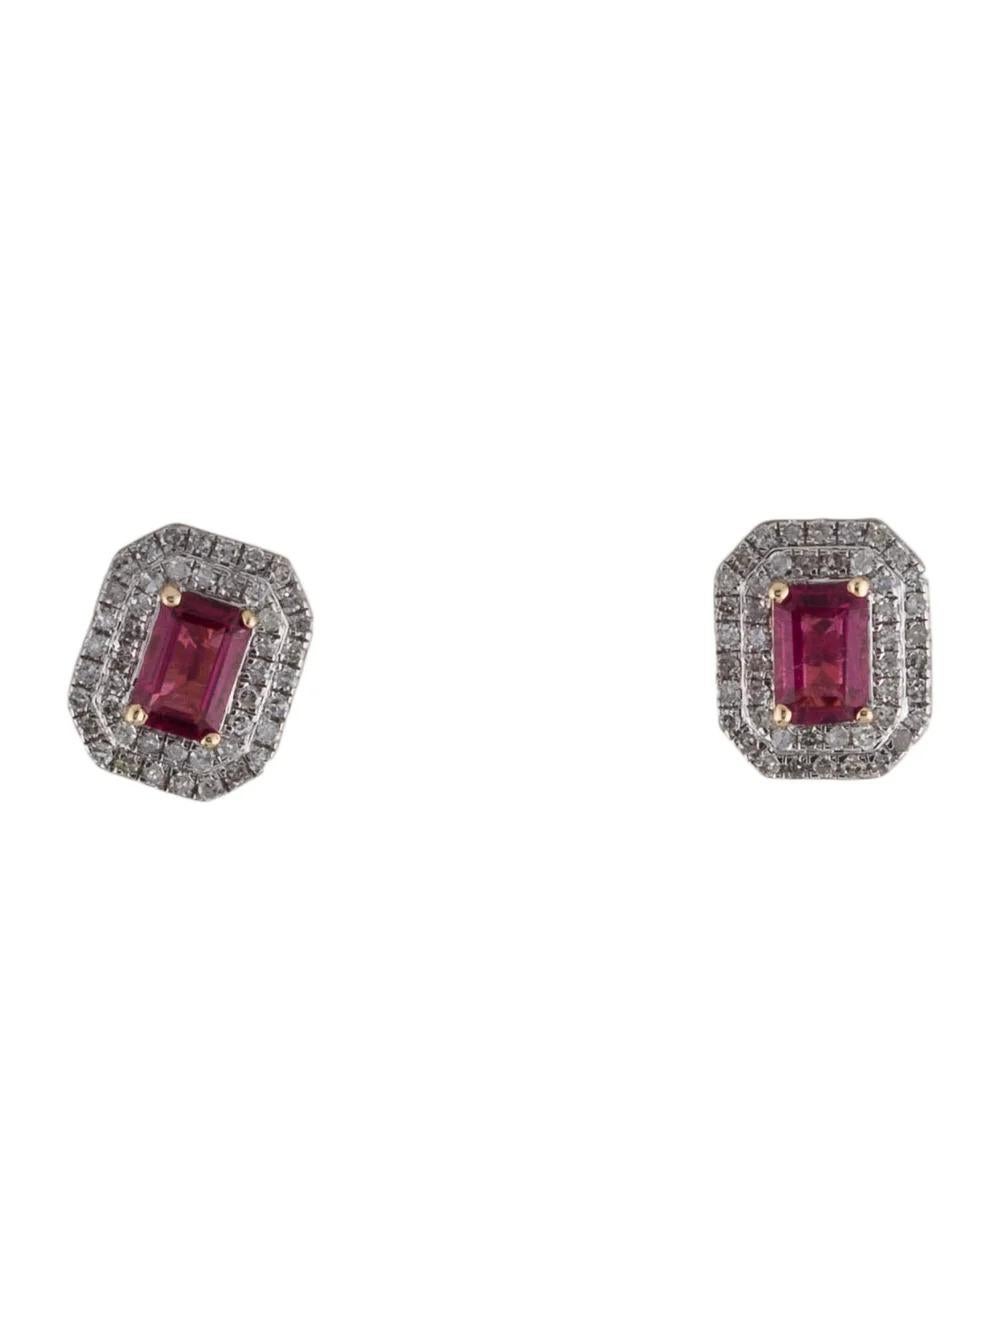 Elevate your elegance with our stunning Rhodium-Plated & 14K Yellow Gold Tourmaline & Diamond Stud Earrings.

Specifications:

* Metal: Rhodium-Plated & 14K Yellow Gold
* Length: 0.5